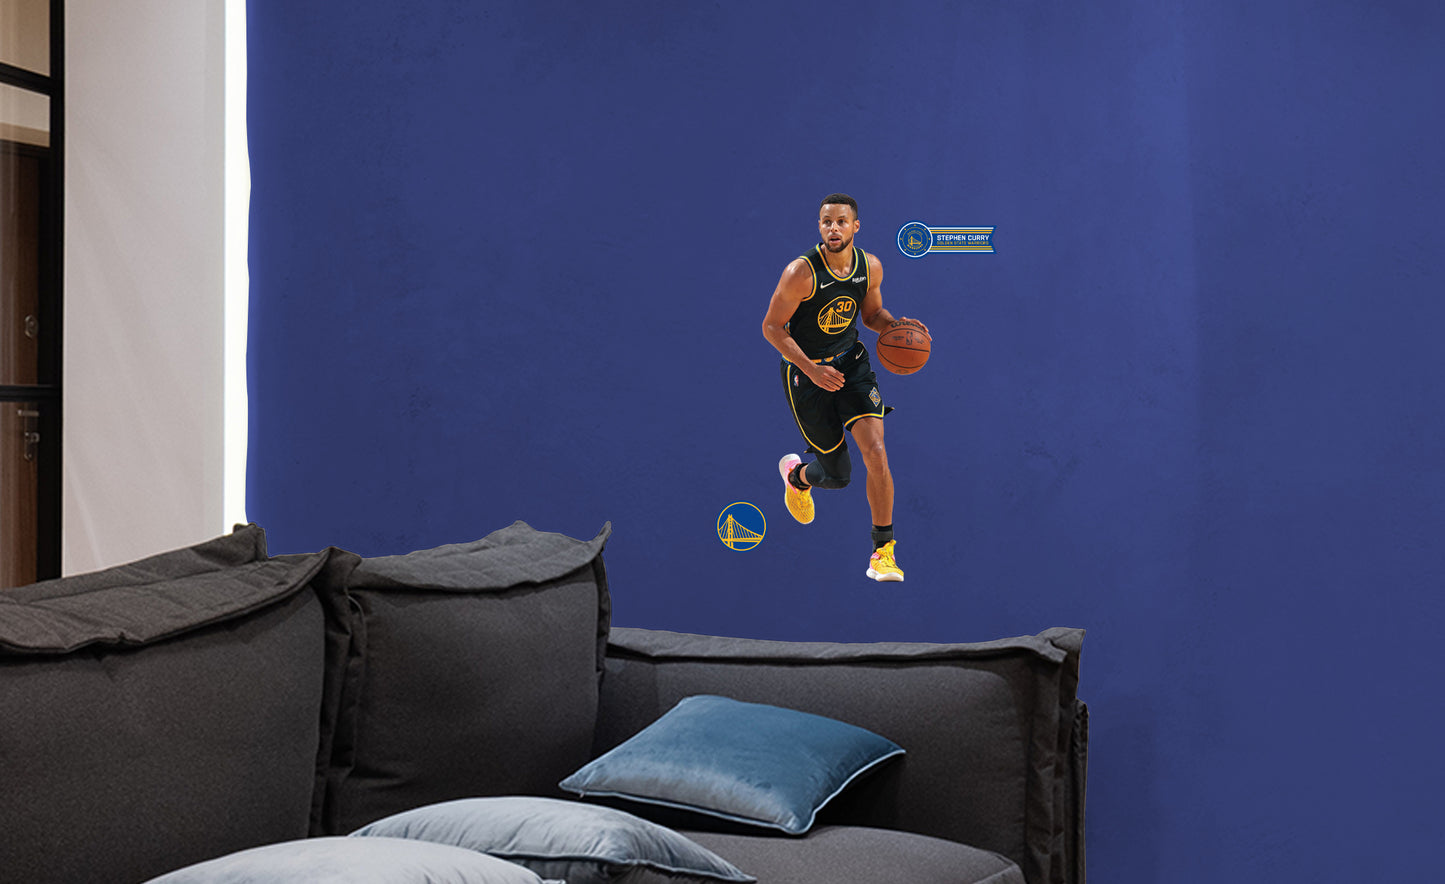 Golden State Warriors: Stephen Curry Black Jersey - Officially Licensed NBA Removable Adhesive Decal